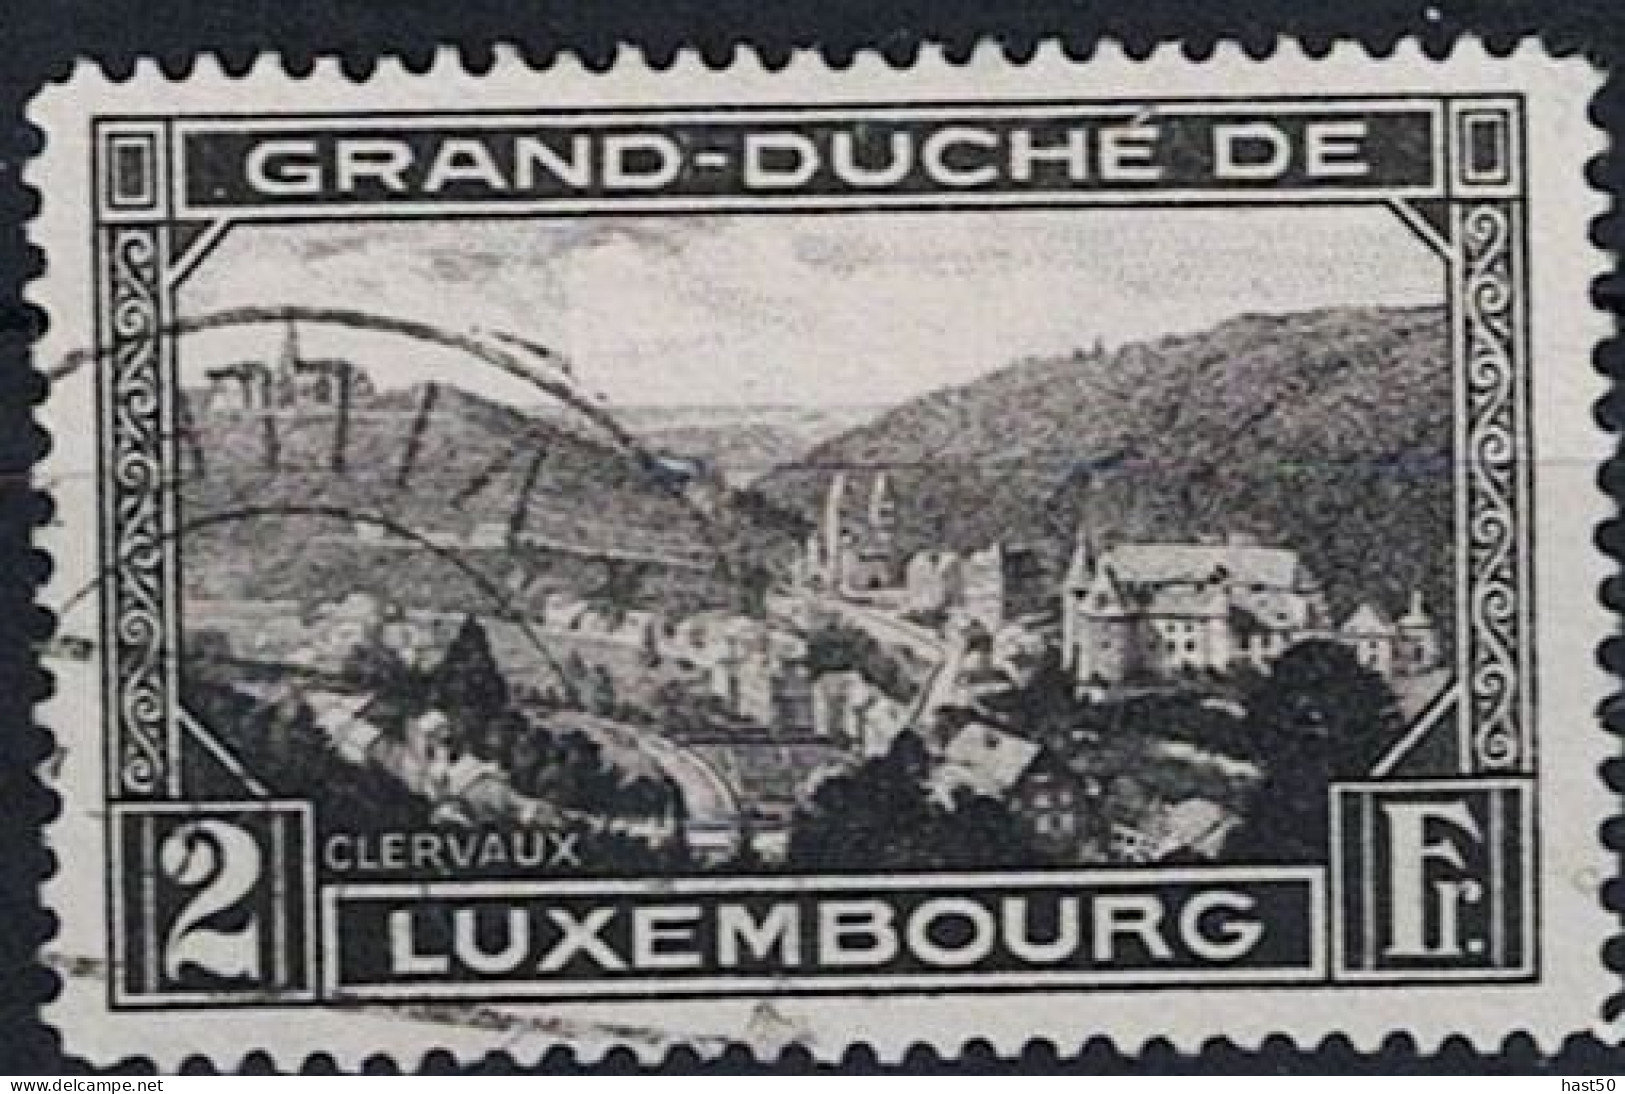 Luxemburg - Clerf (Clervaux) (MiNr: 207) 1928 - Gest Used Obl - Used Stamps